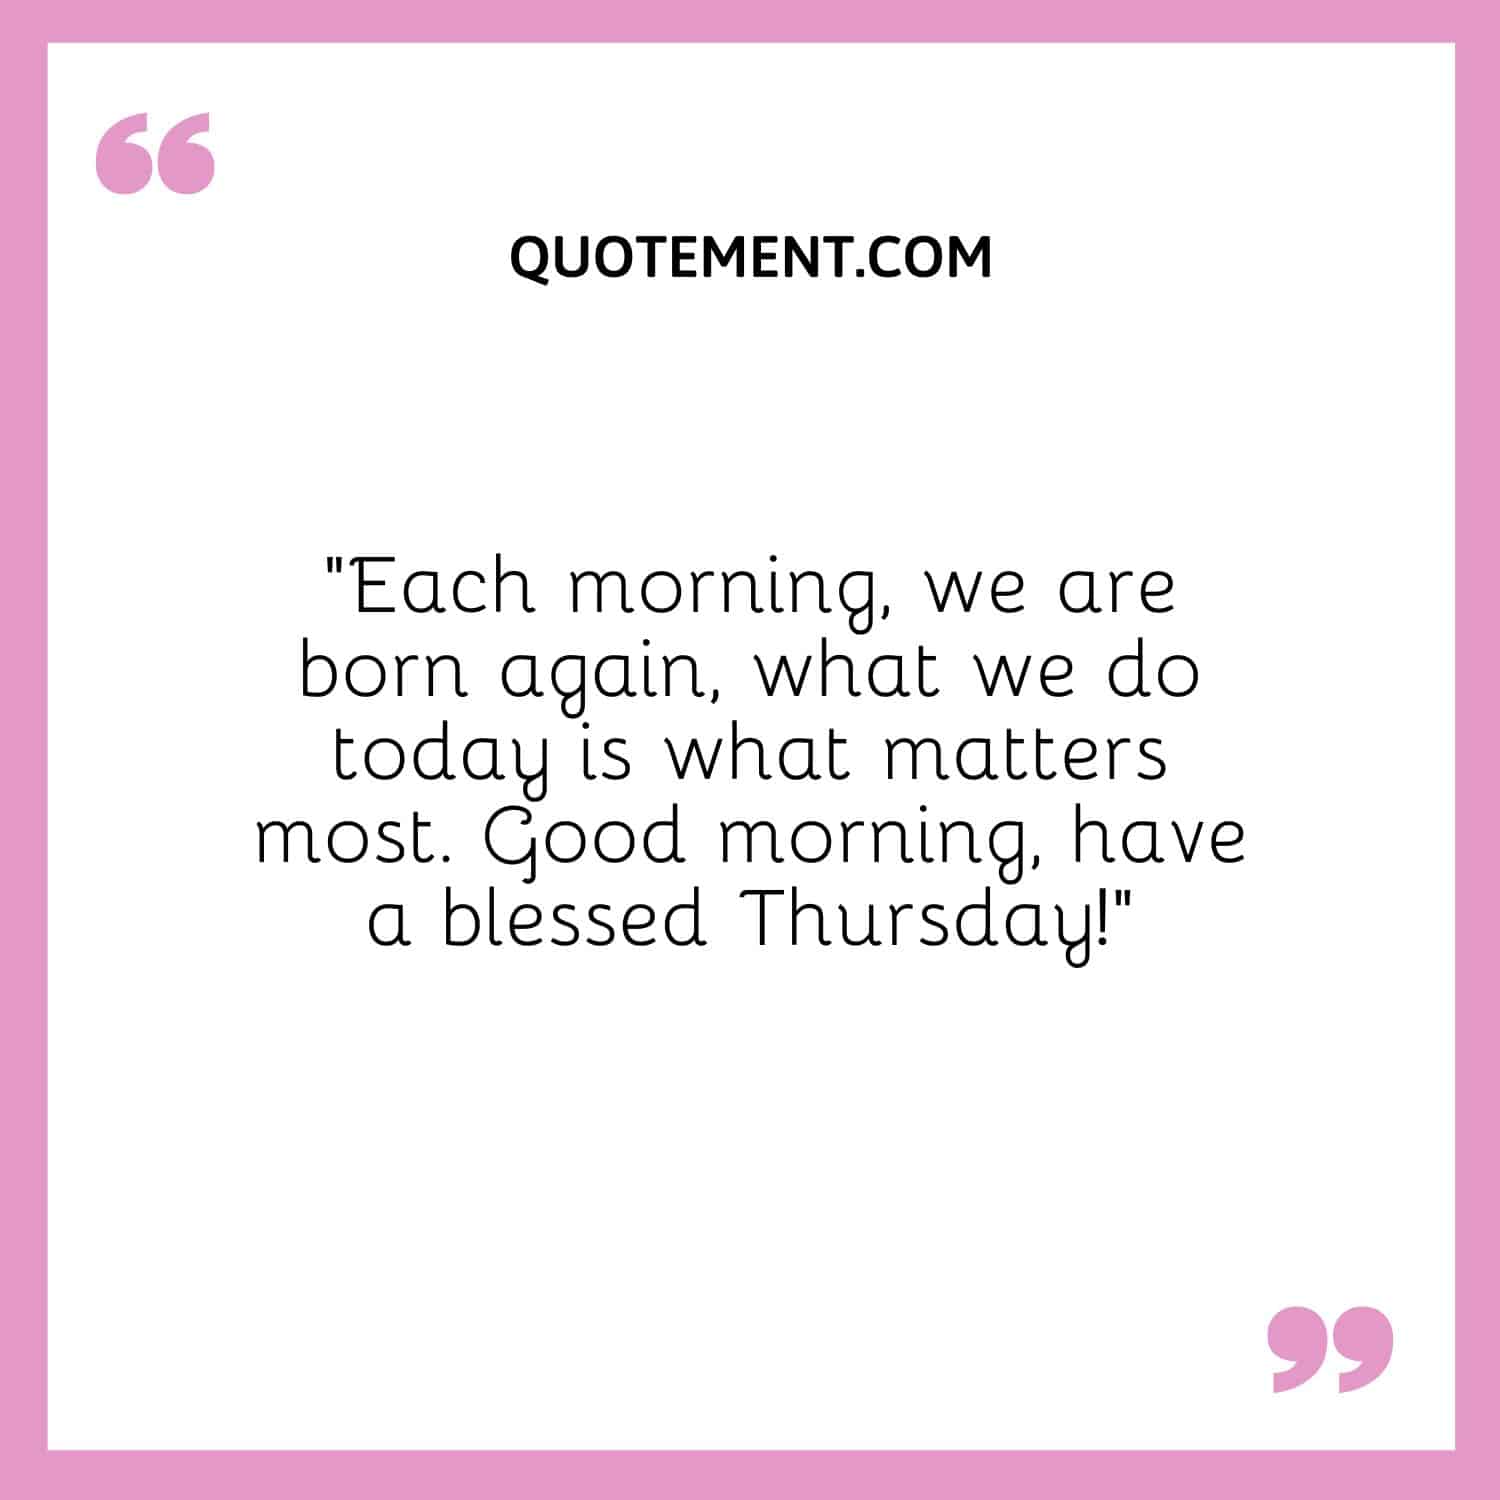 “Each morning, we are born again, what we do today is what matters most. Good morning, have a blessed Thursday!”